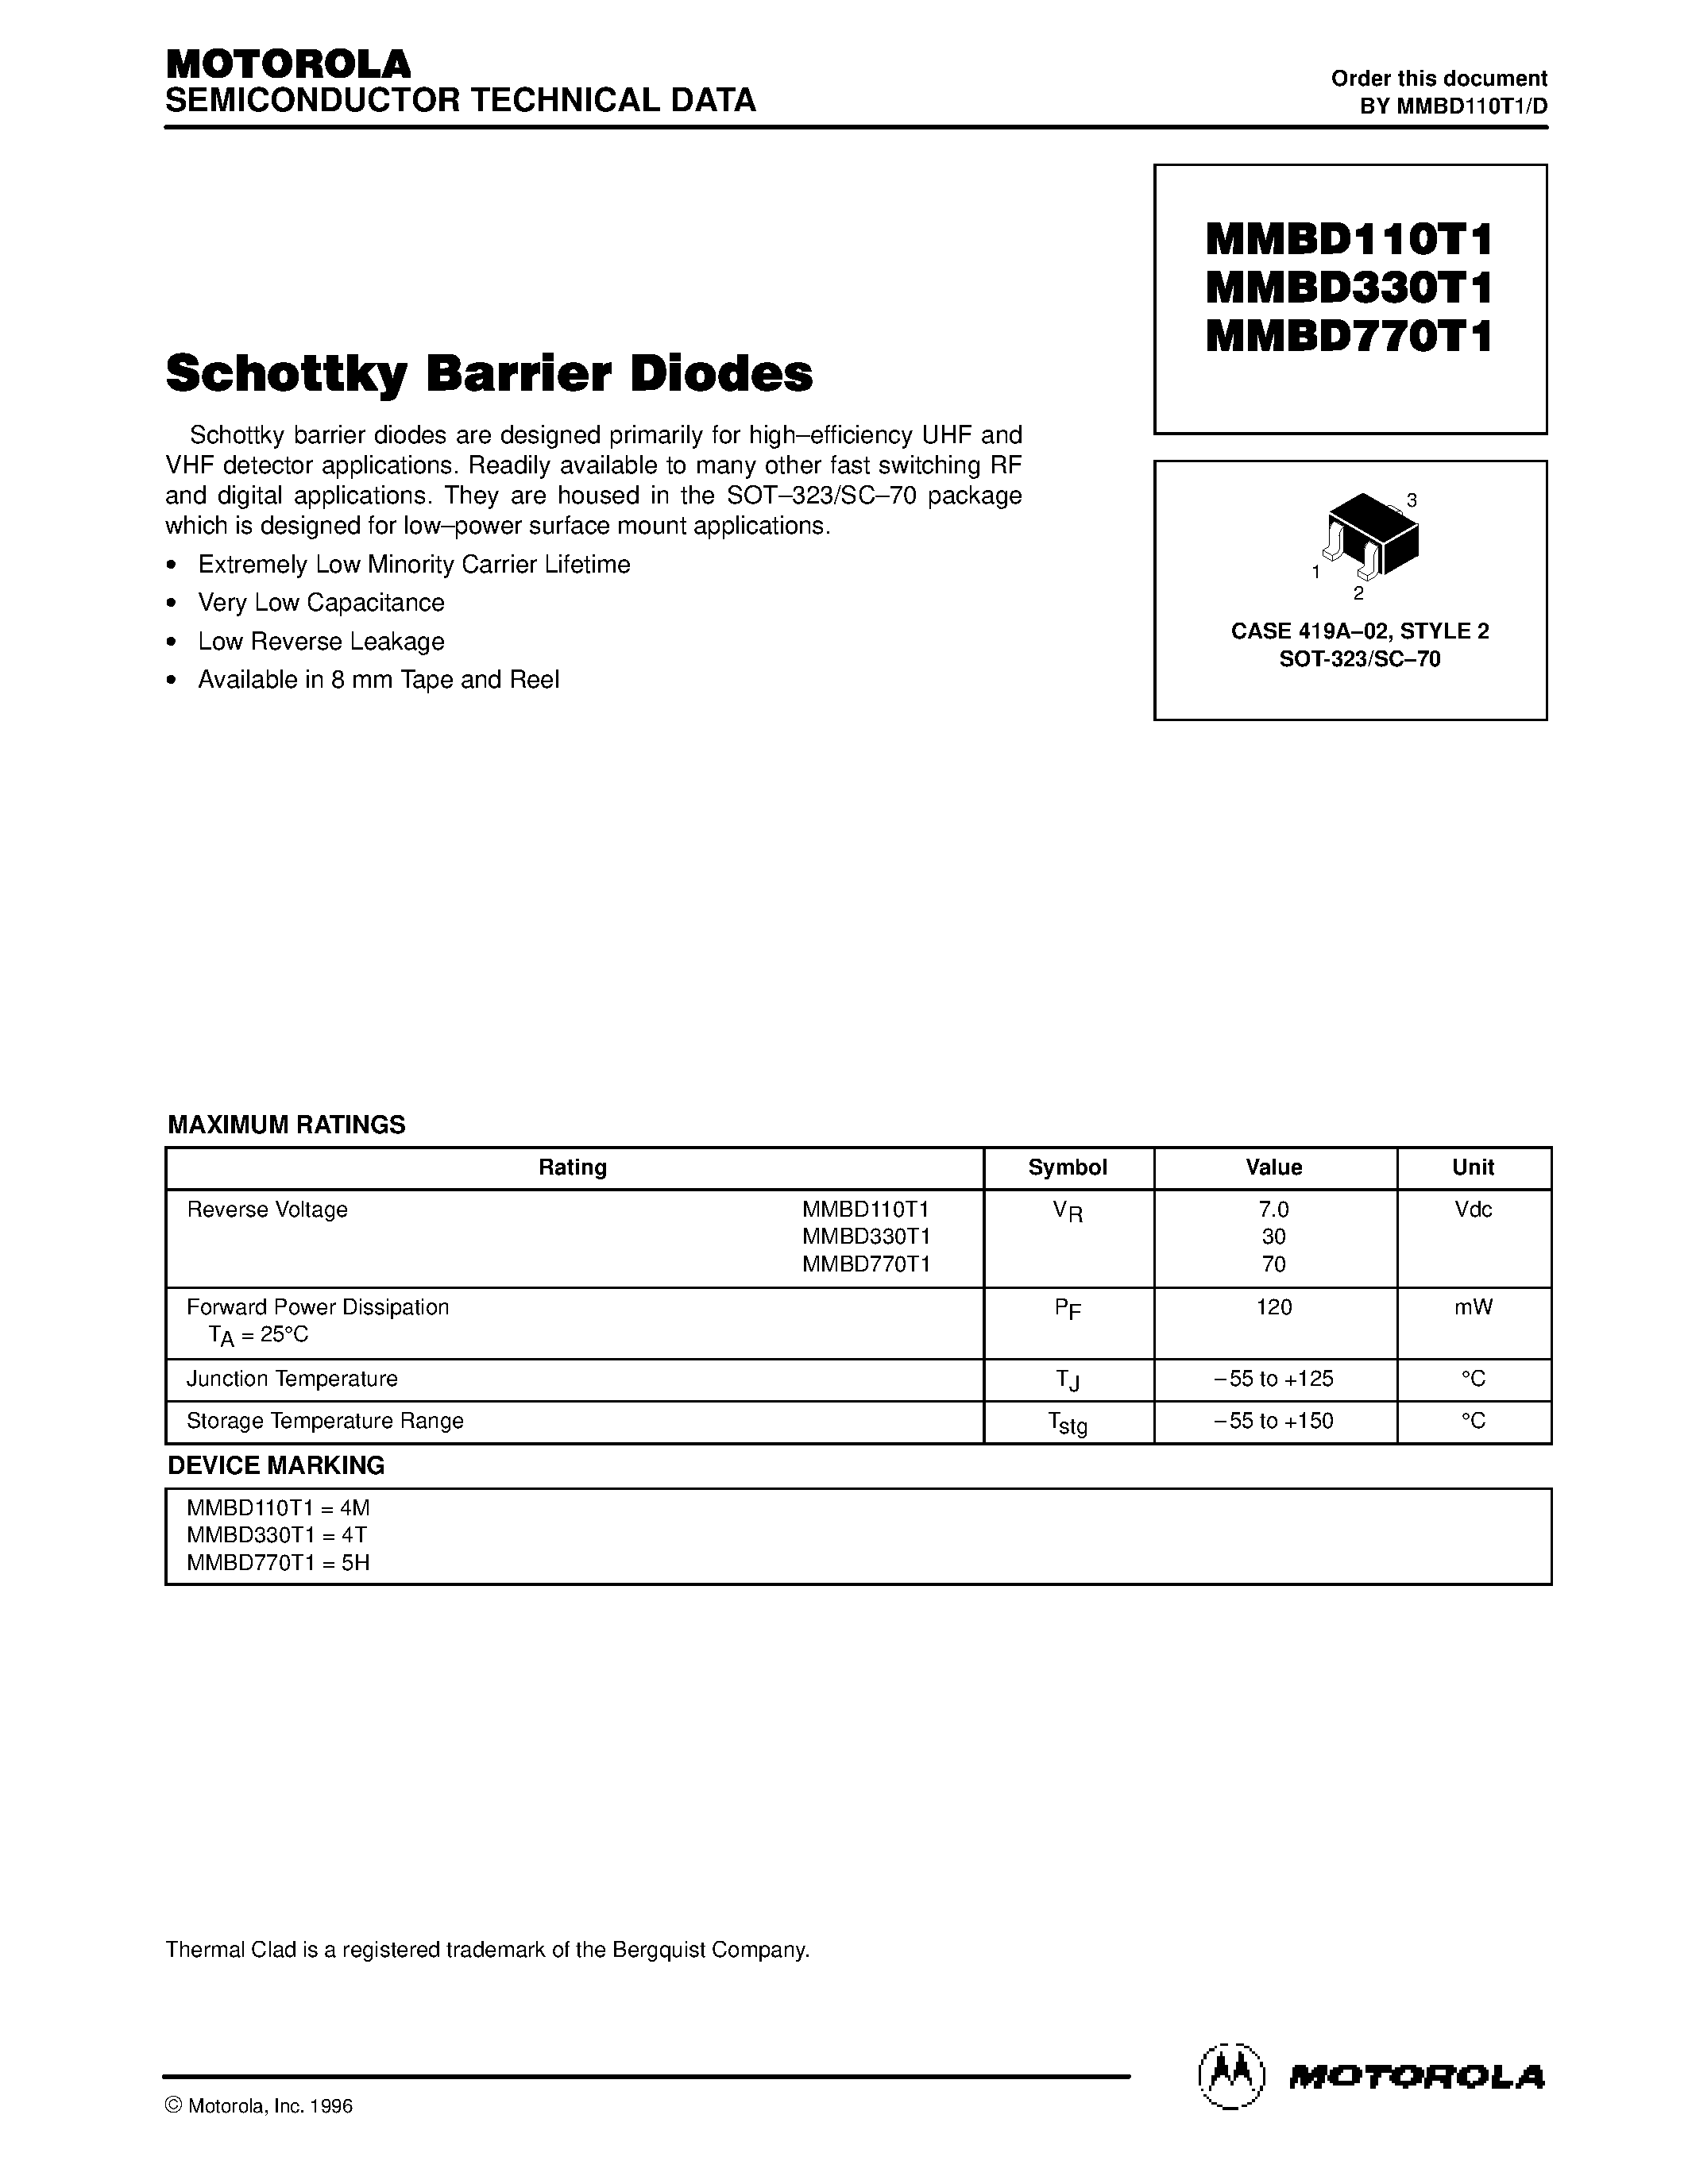 Даташит MMBD770T1 - Schottky Barrier Diodes страница 1